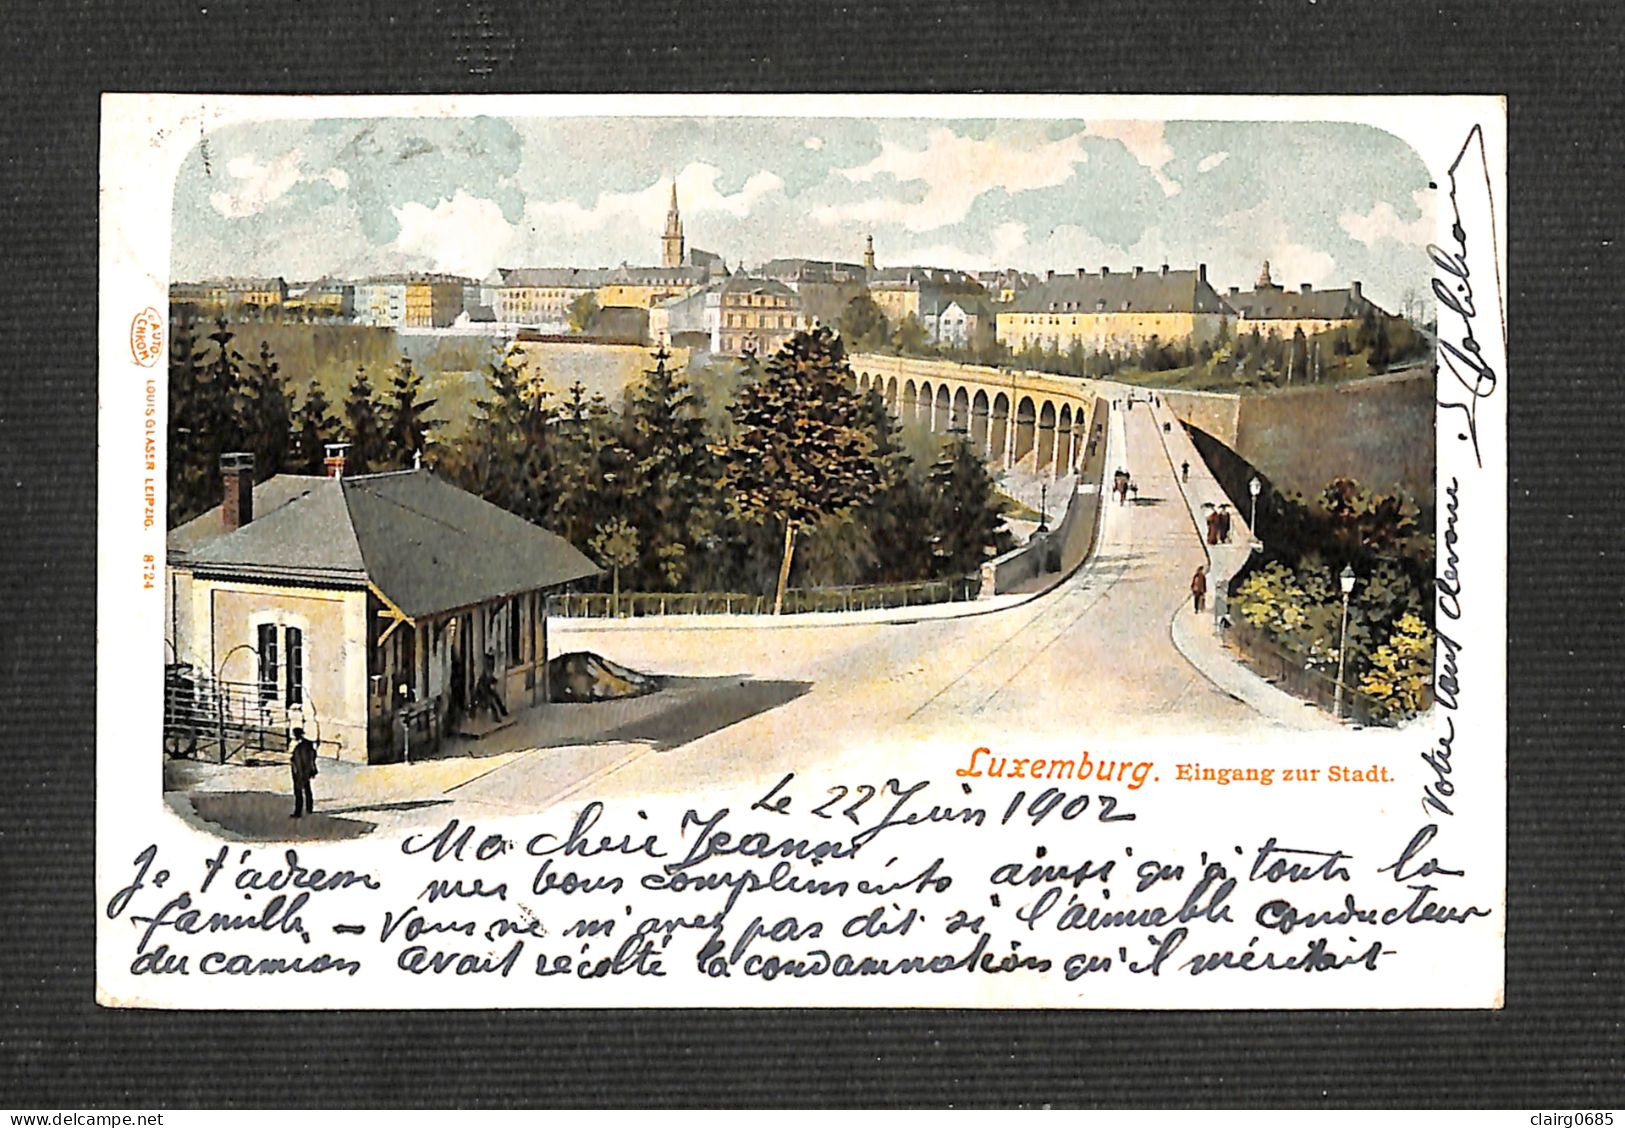 LUXEMBOURG - LUXEMBURG - Eingang Zur Stadt - 1902 - Luxembourg - Ville